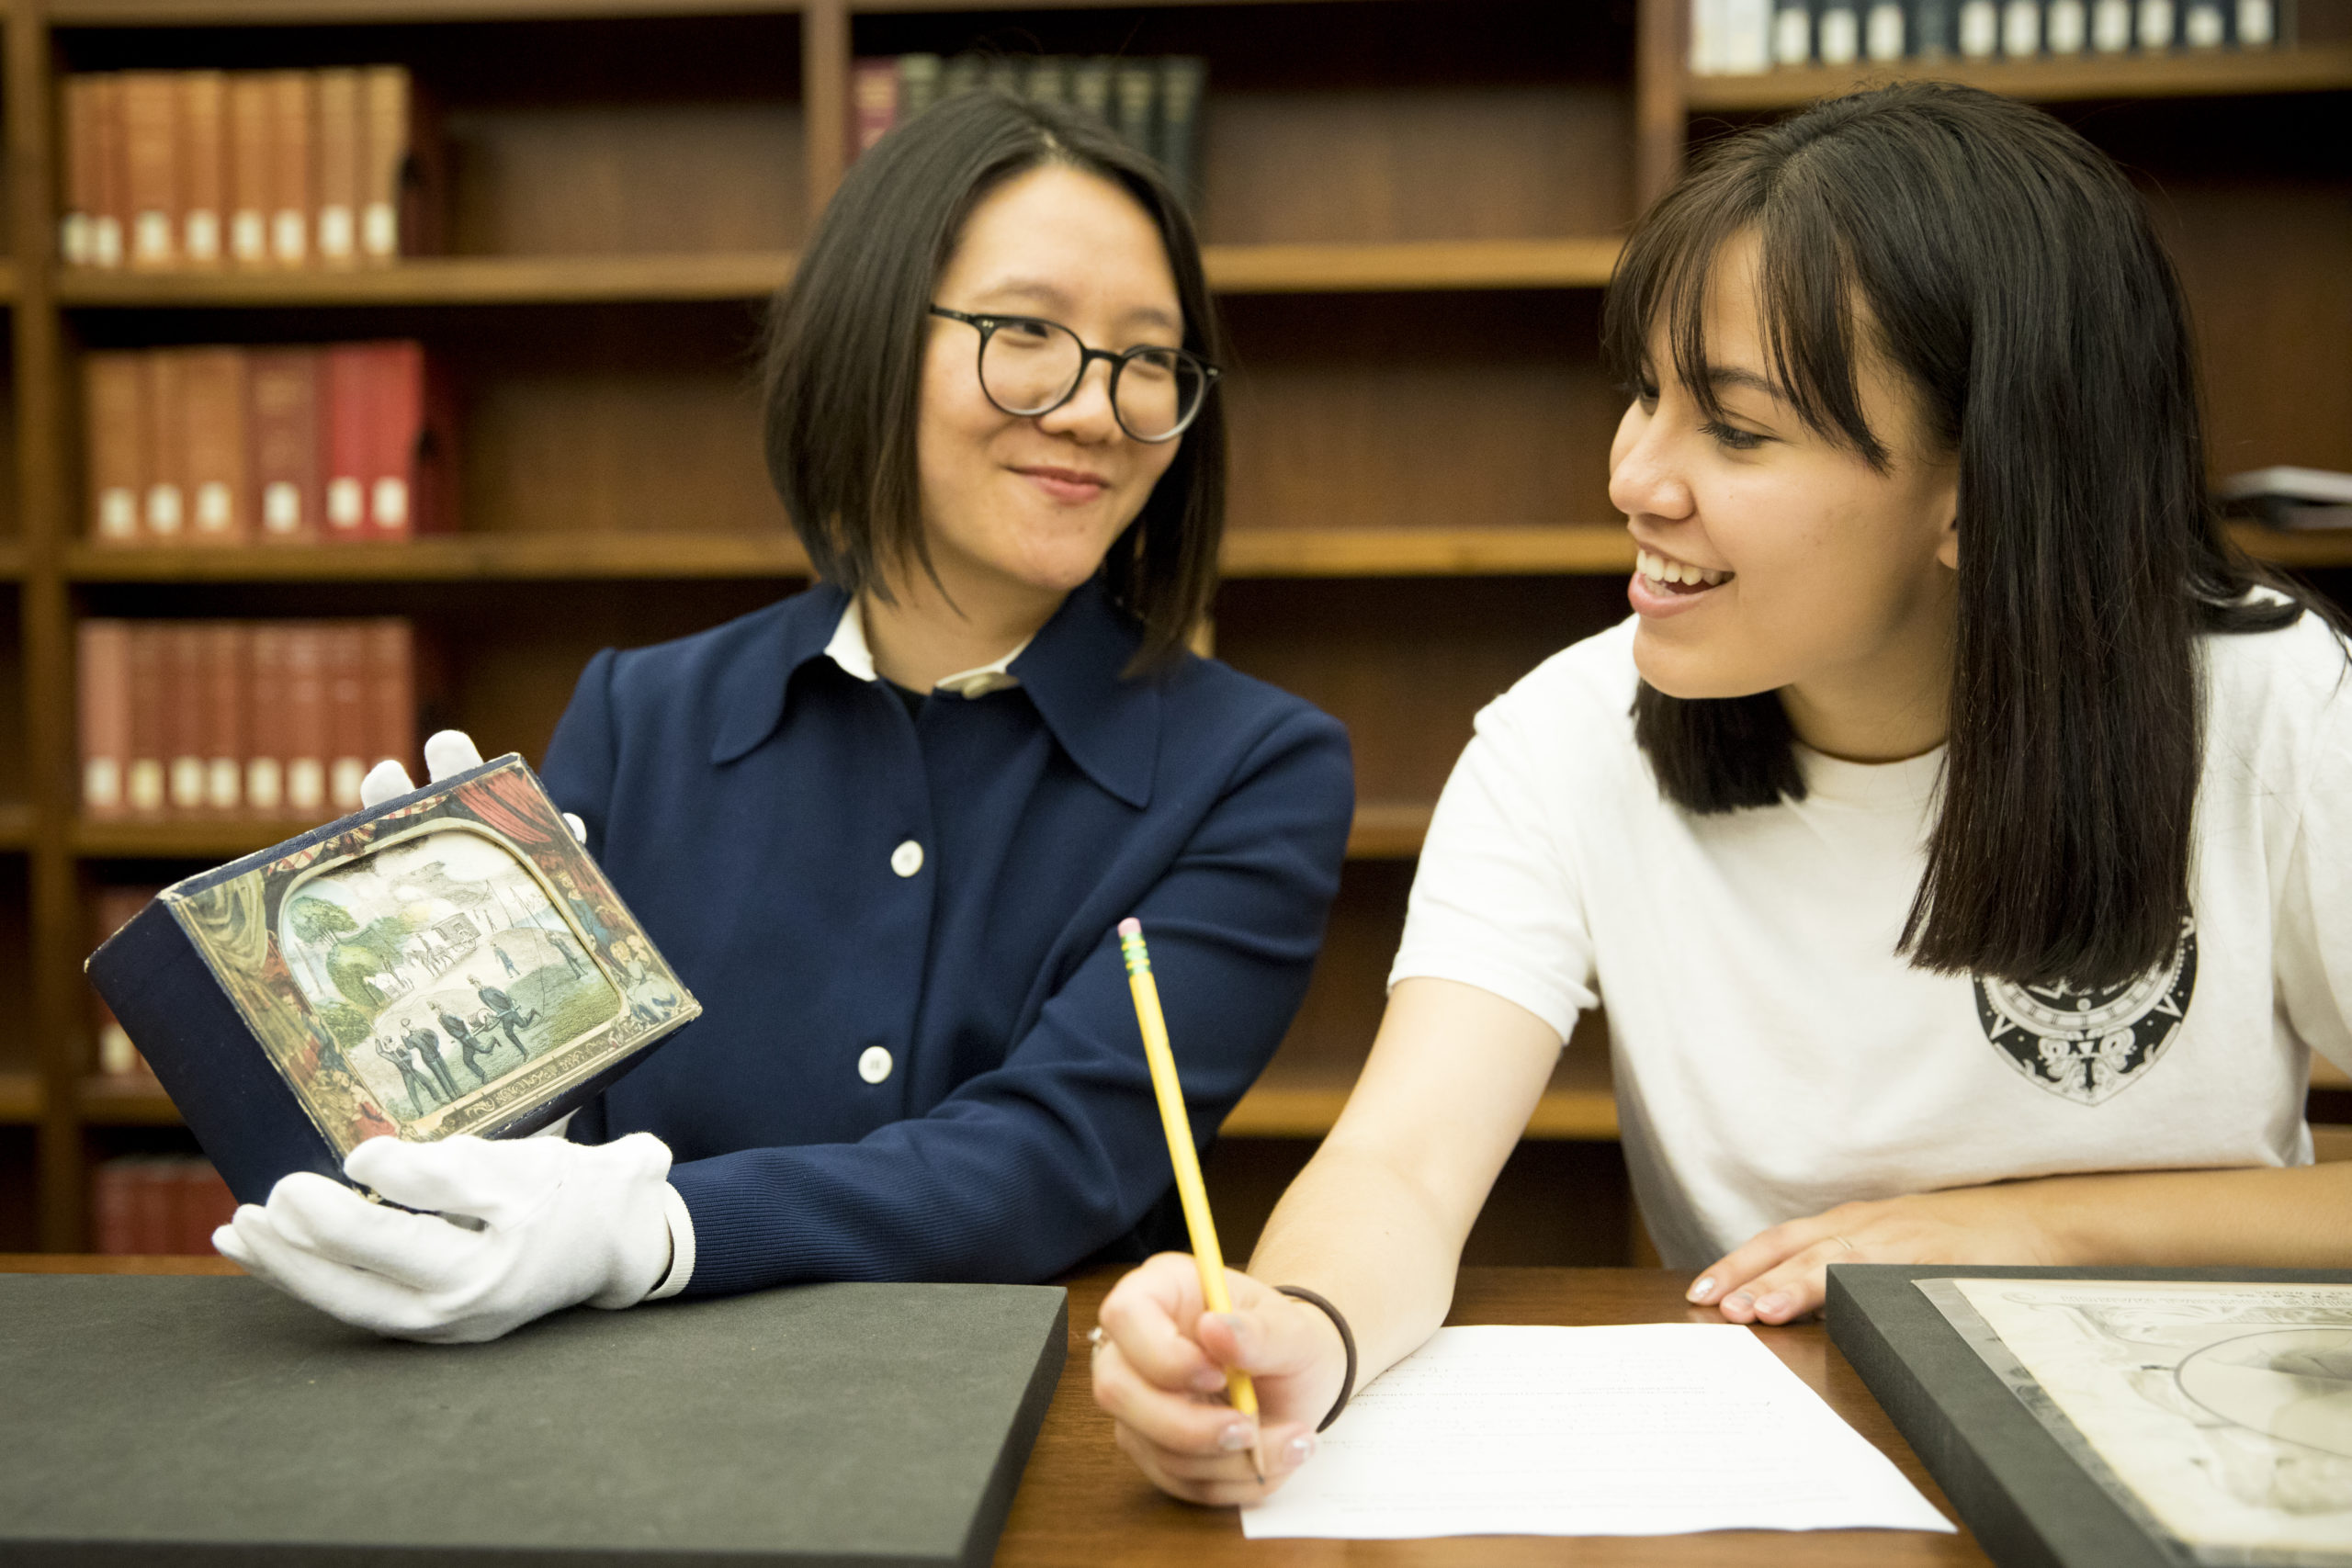 Archives and Special Collections Instruction Librarian Rachel Wen-Paloutzian with a student